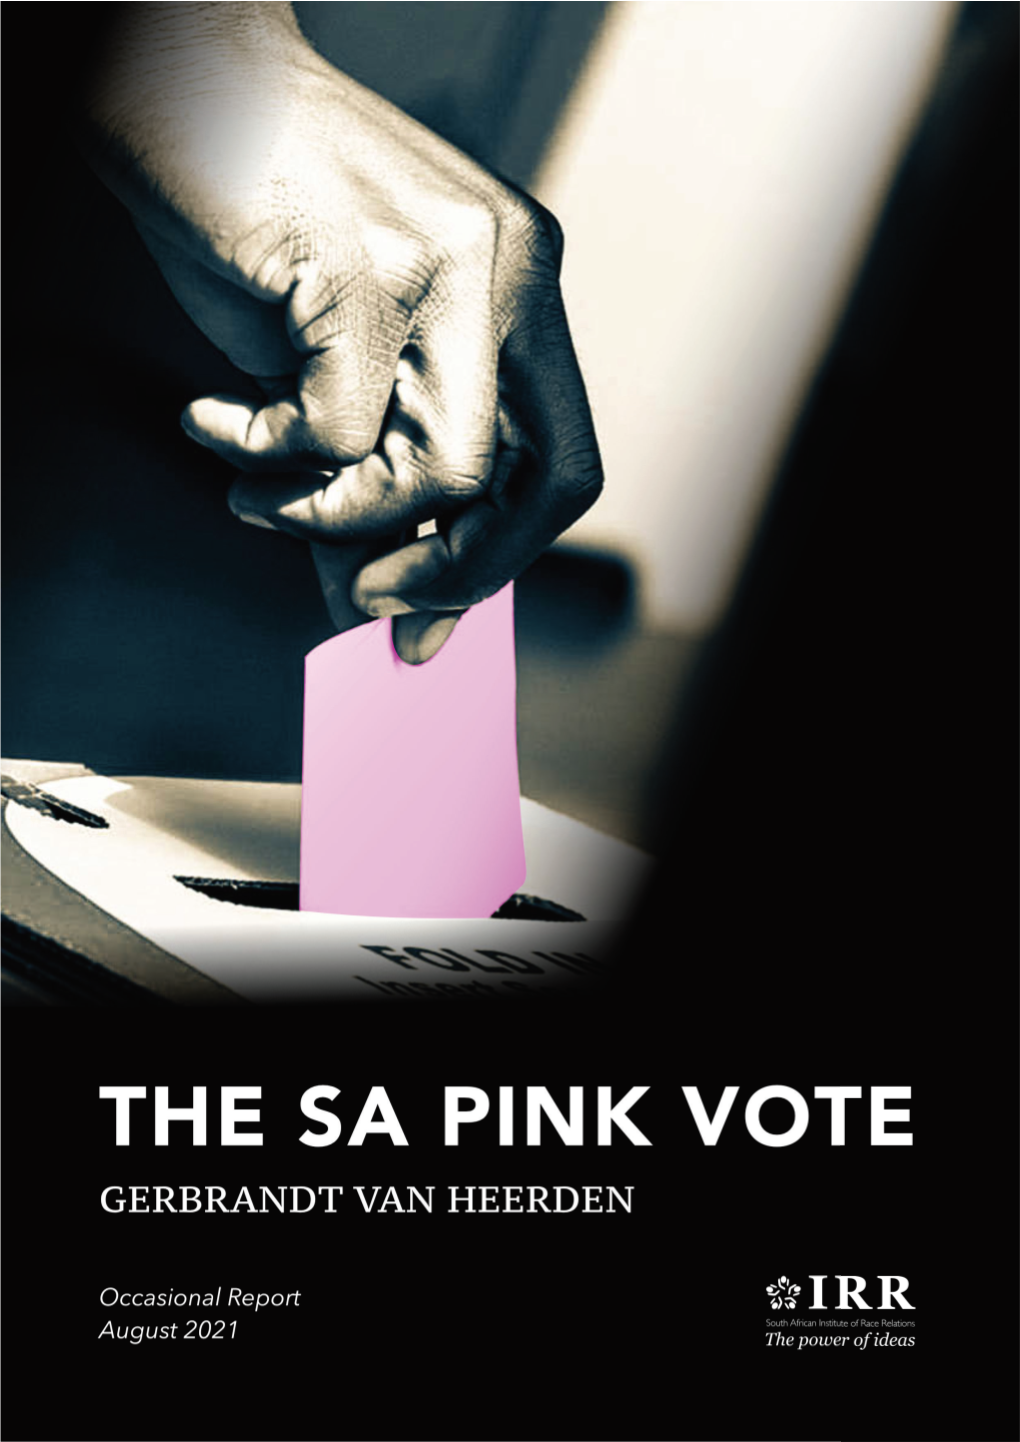 01A — Page 1-21 — the SA Pink Vote (13.08.2021)